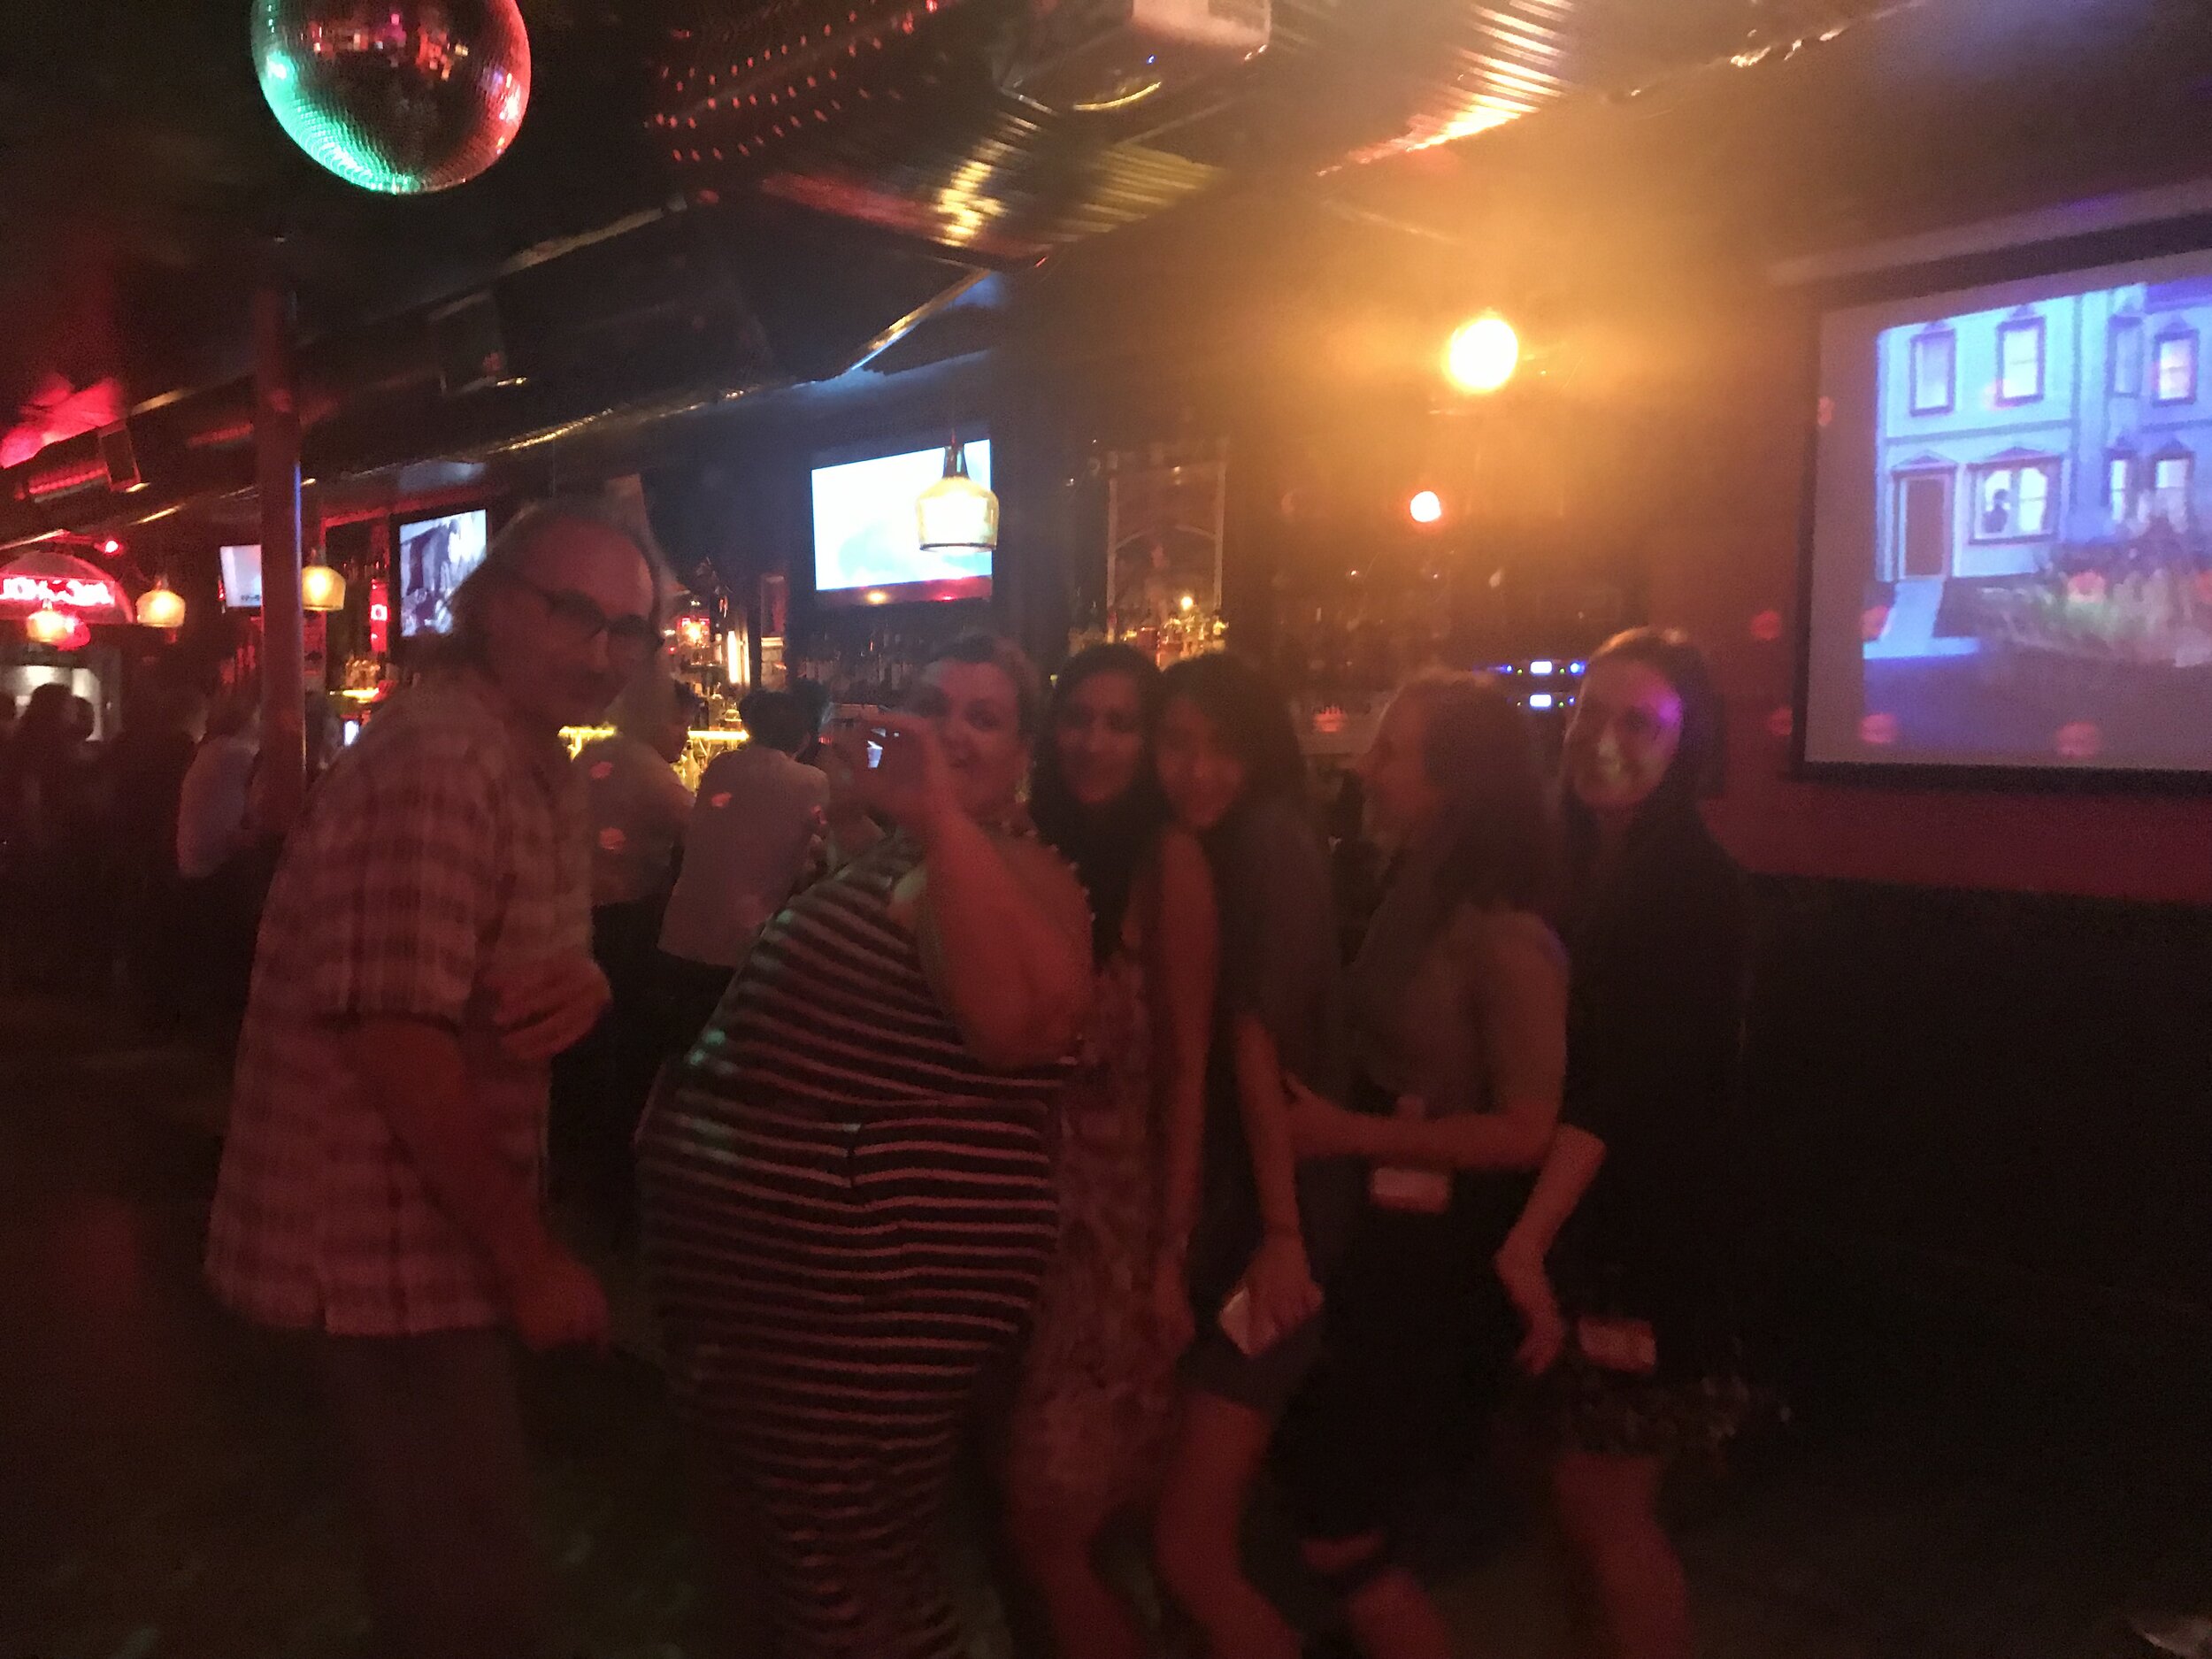  We love to dance… (Especially John)  August 2019   